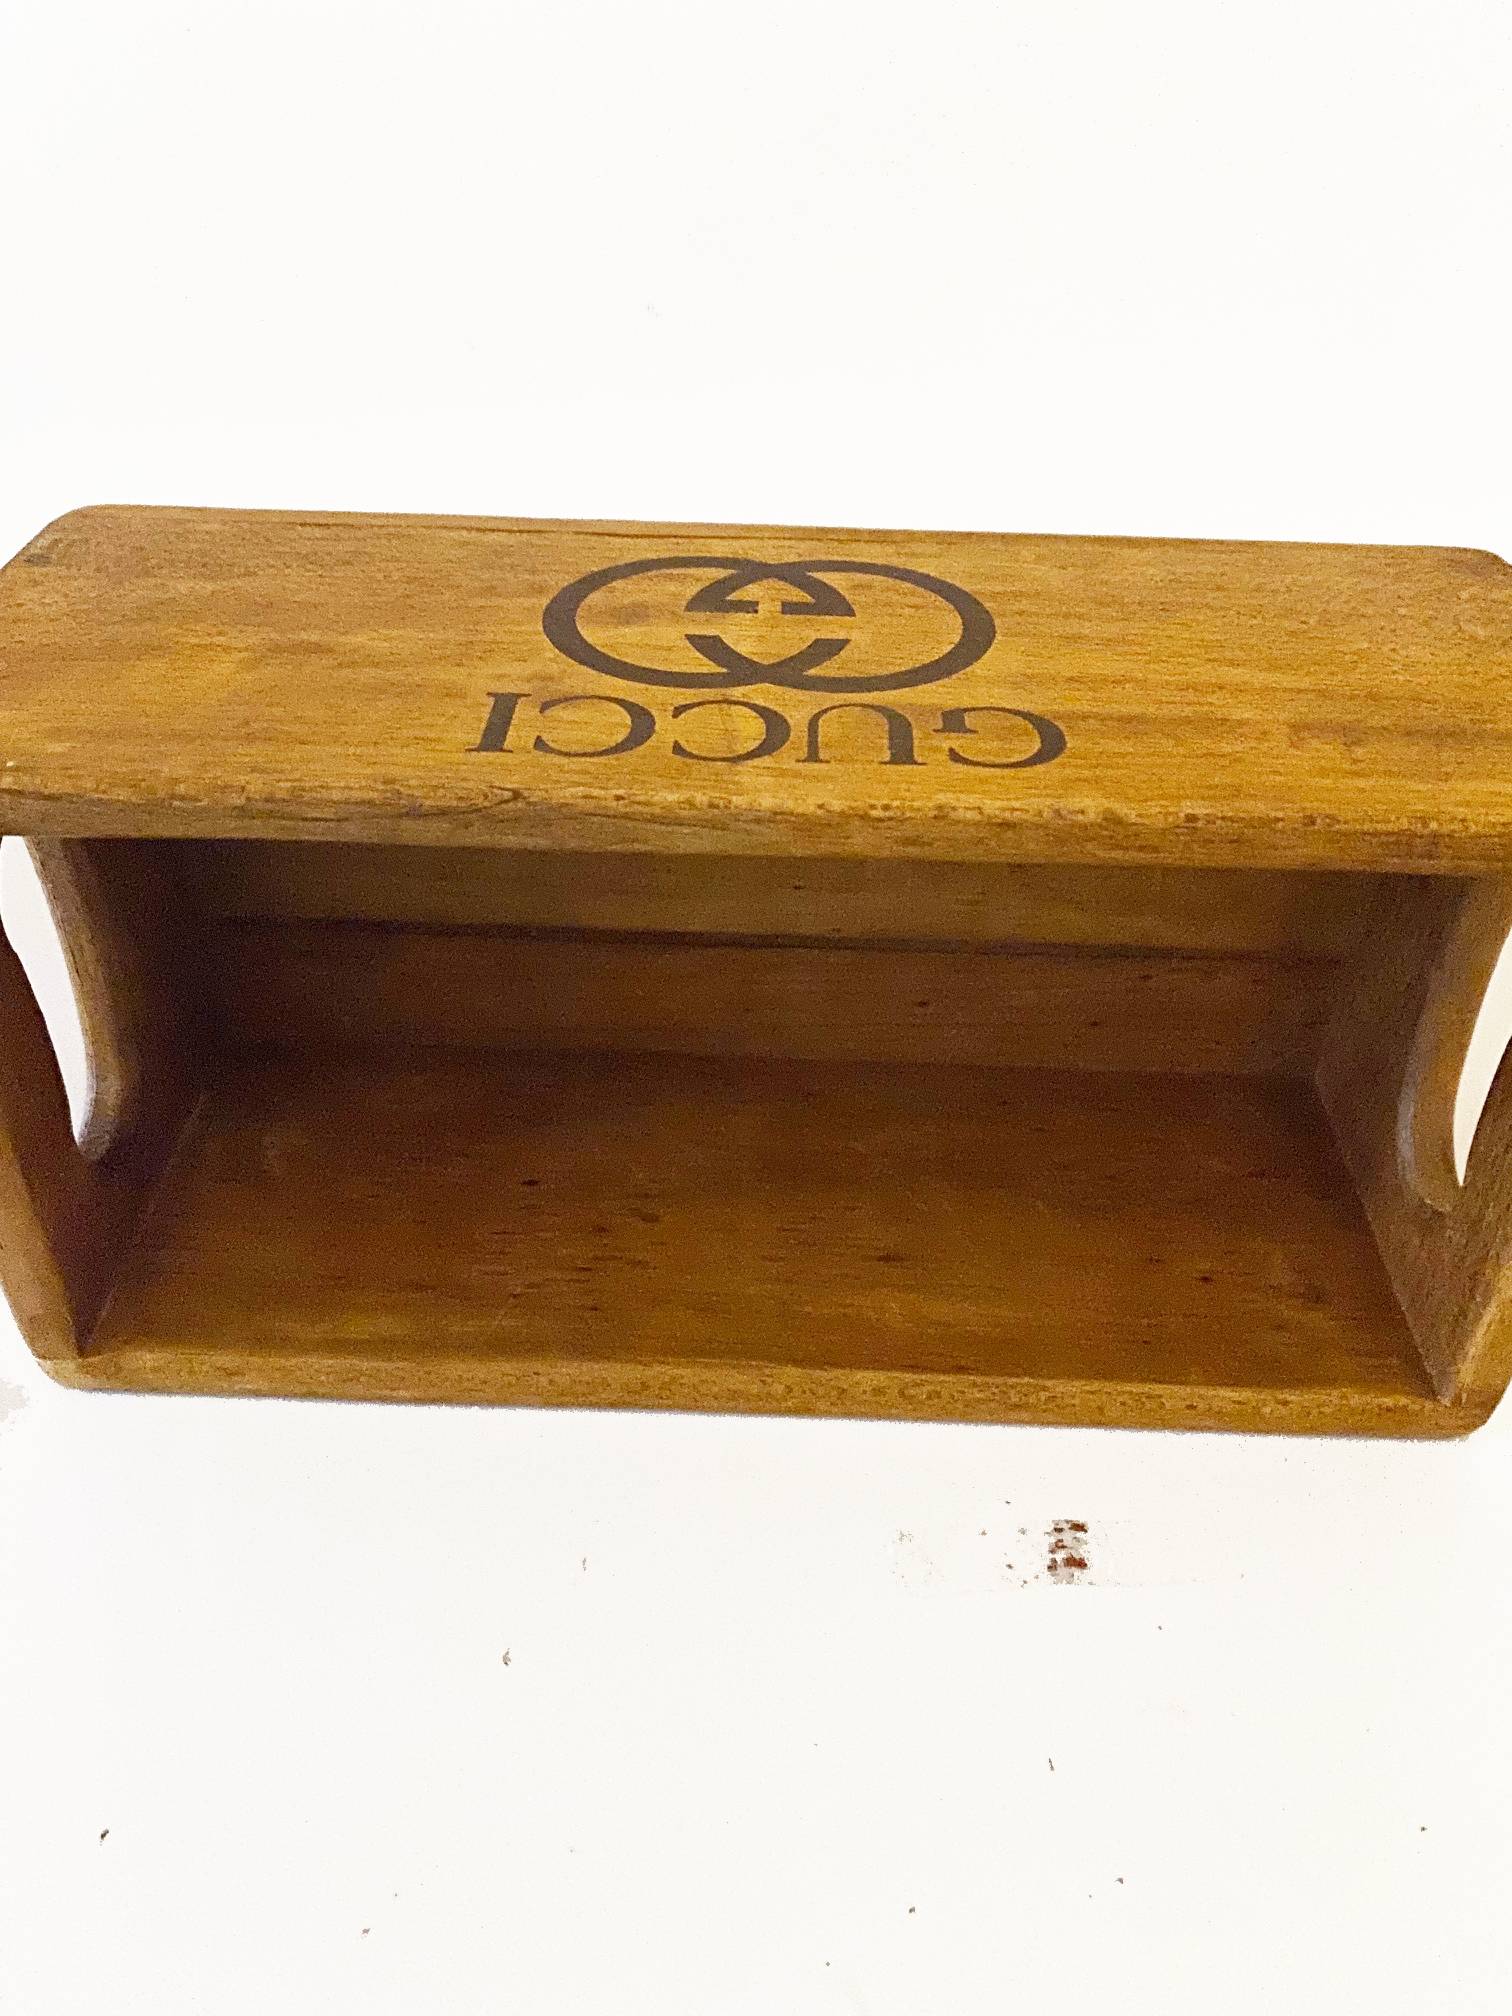 1960s Gucci Wooden Storage Tray Box - style - CHNGR